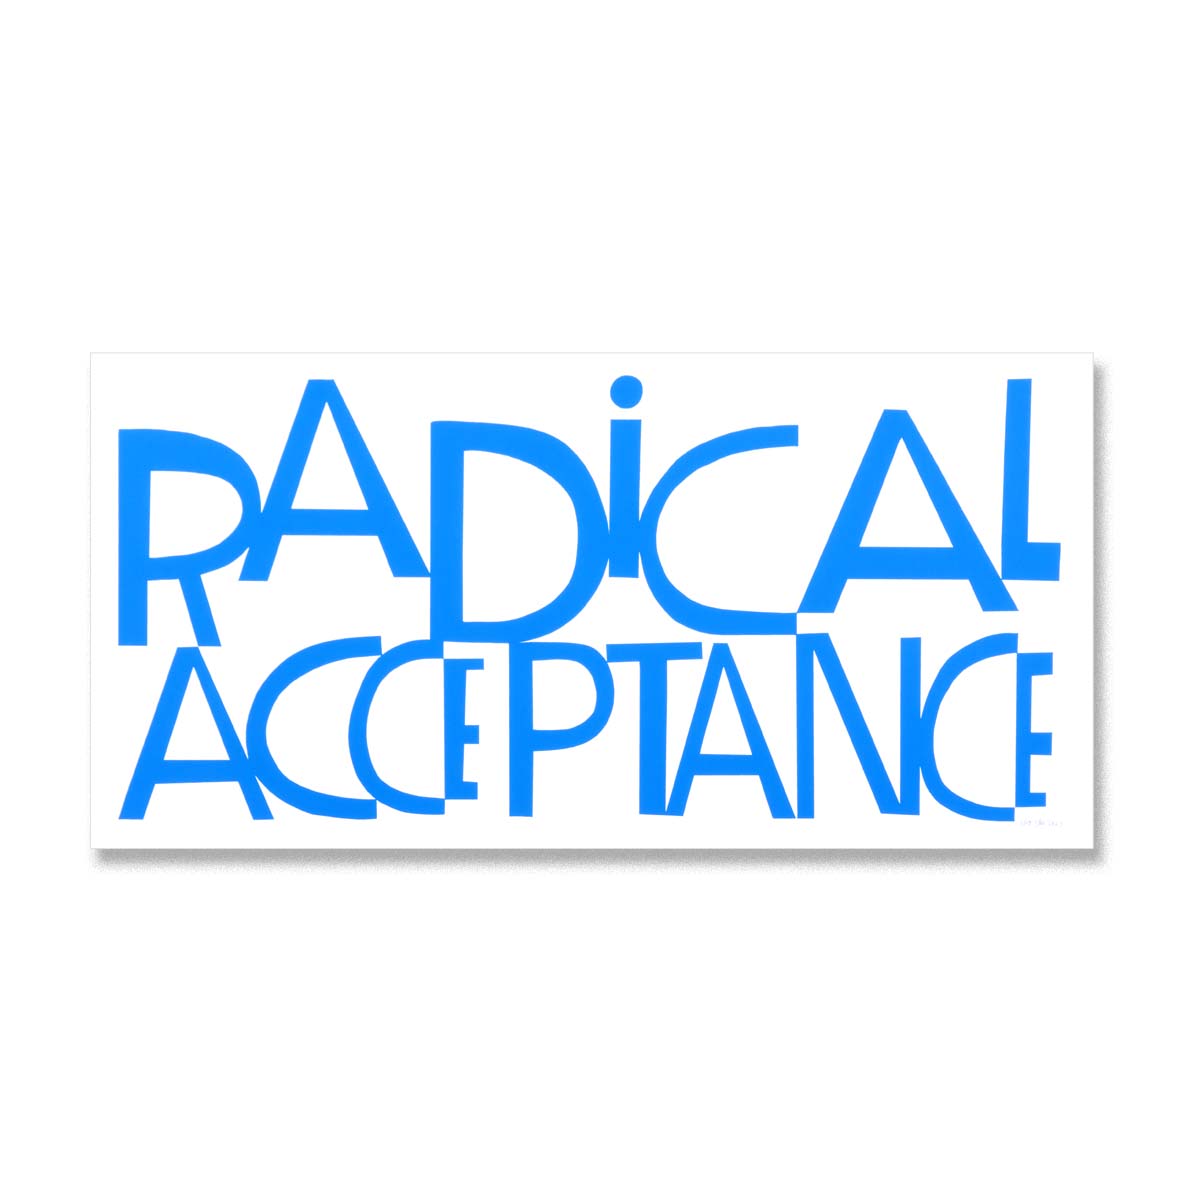 Radical Acceptance - Limited Edition Serigraph